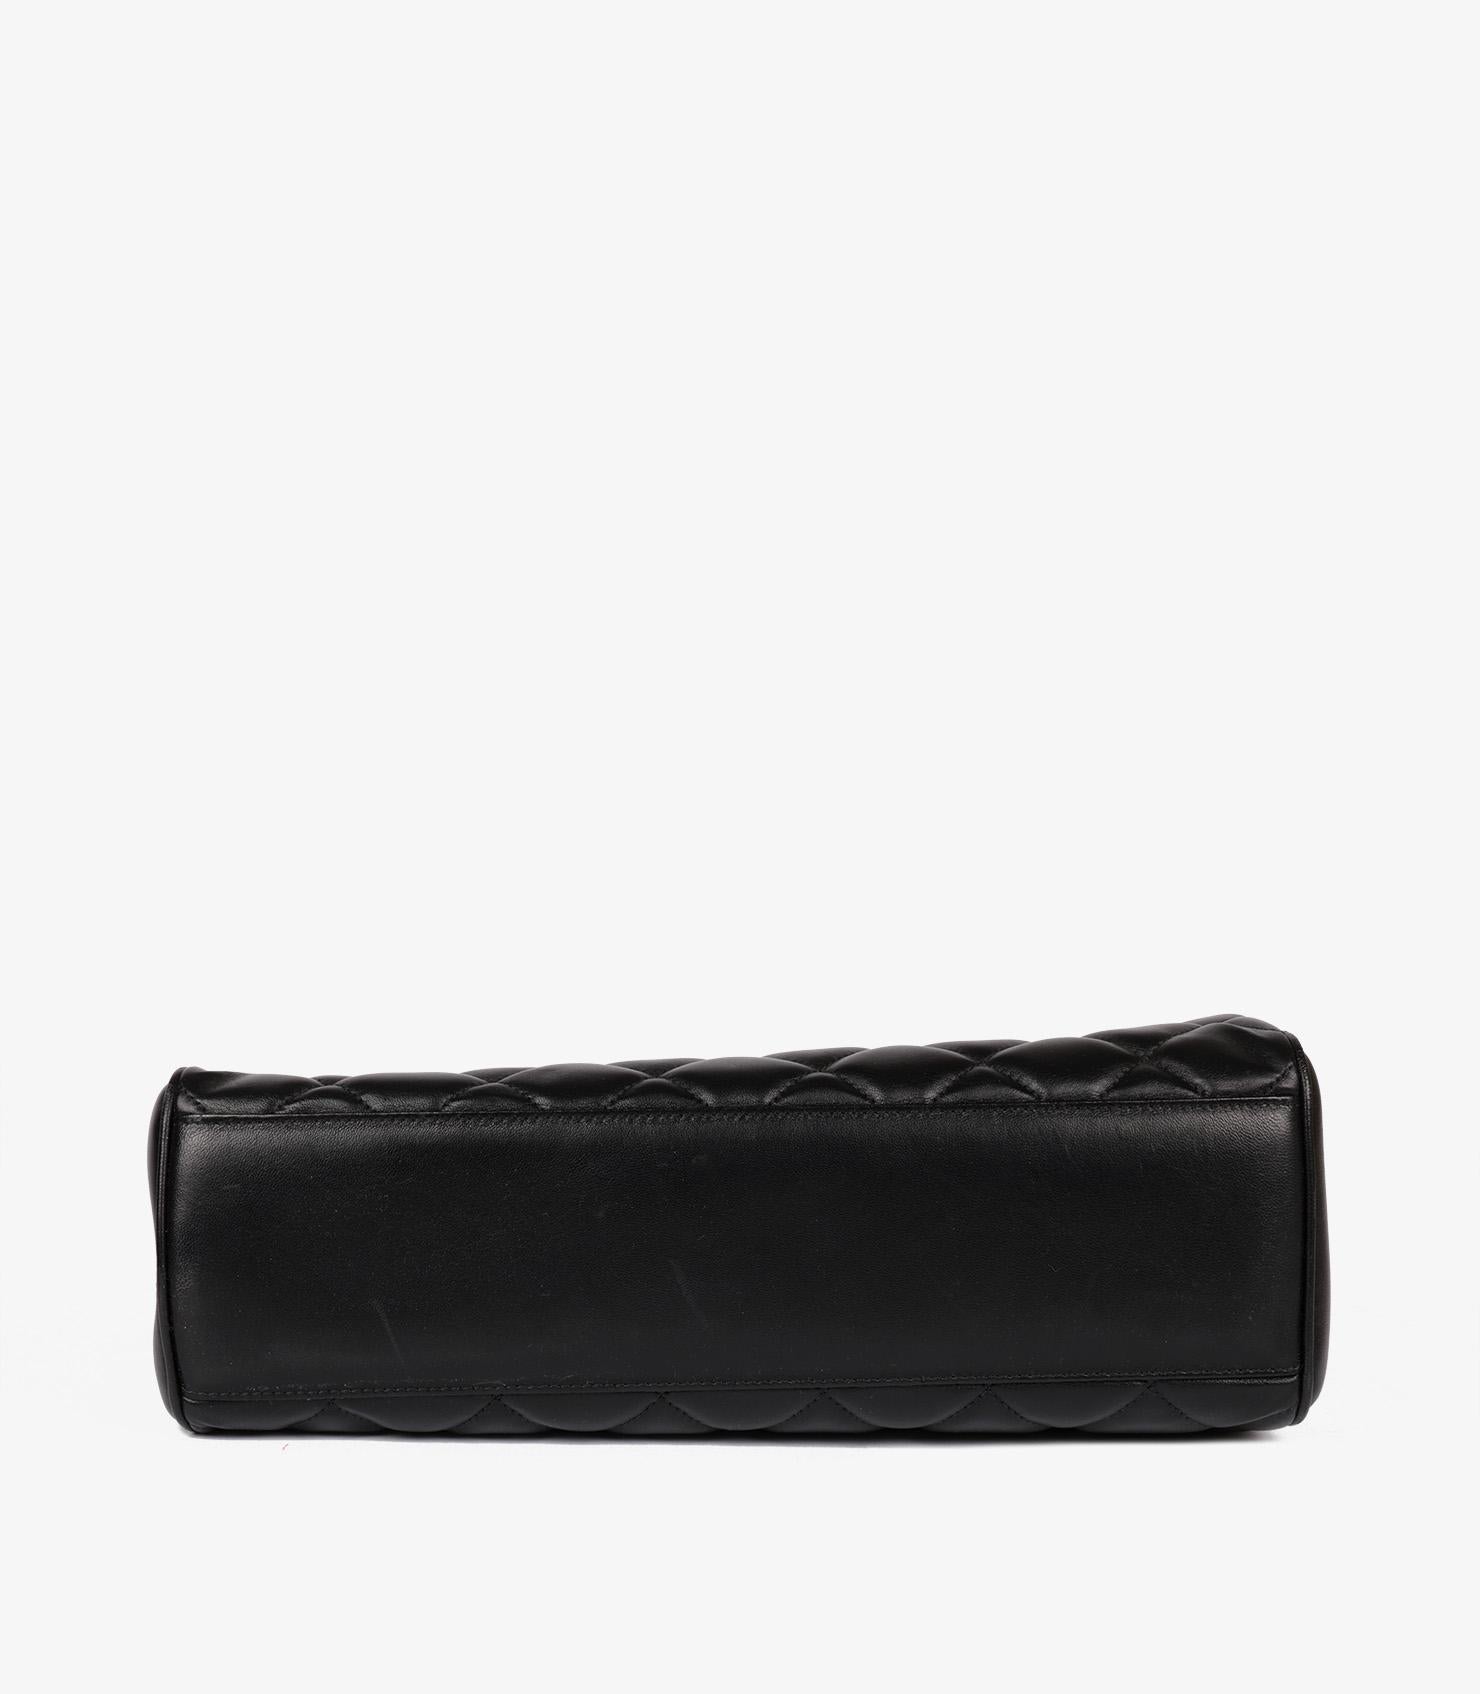 Chanel Black Quilted Lambskin Misia Camera Case Flap Bag 3